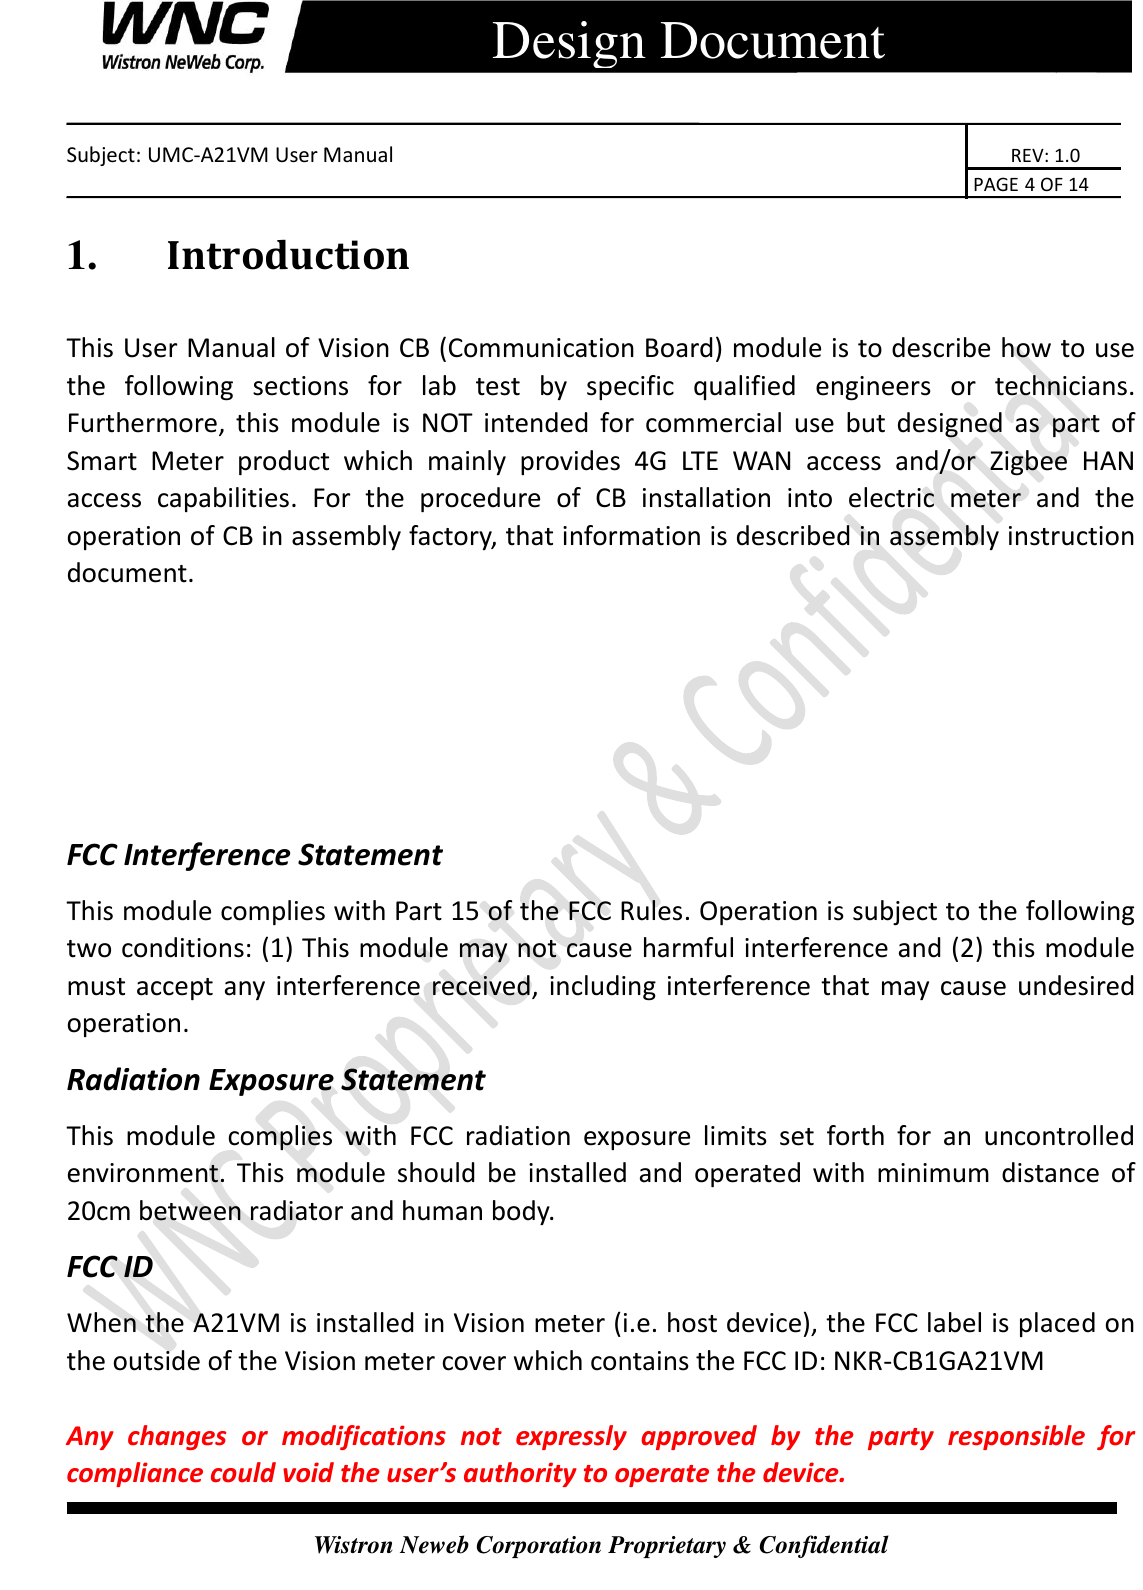    Subject: UMC-A21VM User Manual                                                                      REV: 1.0                                                                                        PAGE 4 OF 14  Wistron Neweb Corporation Proprietary &amp; Confidential      Design Document 1.    Introduction This User Manual of Vision CB (Communication Board) module is to describe how to use the  following  sections  for  lab  test  by  specific  qualified  engineers  or  technicians. Furthermore,  this  module  is  NOT  intended for commercial  use  but  designed  as  part  of Smart  Meter  product  which  mainly  provides  4G  LTE  WAN  access  and/or  Zigbee  HAN access  capabilities.  For  the  procedure  of  CB  installation  into  electric  meter  and  the operation of CB in assembly factory, that information is described in assembly instruction document.    FCC Interference Statement This module complies with Part 15 of the FCC Rules. Operation is subject to the following two conditions: (1) This module may not cause harmful interference and (2) this module must accept any interference received, including interference that may cause undesired operation.   Radiation Exposure Statement This  module  complies  with  FCC  radiation  exposure  limits  set  forth  for  an  uncontrolled environment. This  module  should  be  installed and  operated  with  minimum  distance of 20cm between radiator and human body. FCC ID When the A21VM is installed in Vision meter (i.e. host device), the FCC label is placed on the outside of the Vision meter cover which contains the FCC ID: NKR-CB1GA21VM  Any  changes  or  modifications  not  expressly  approved  by  the  party  responsible  for compliance could void the user’s authority to operate the device. 